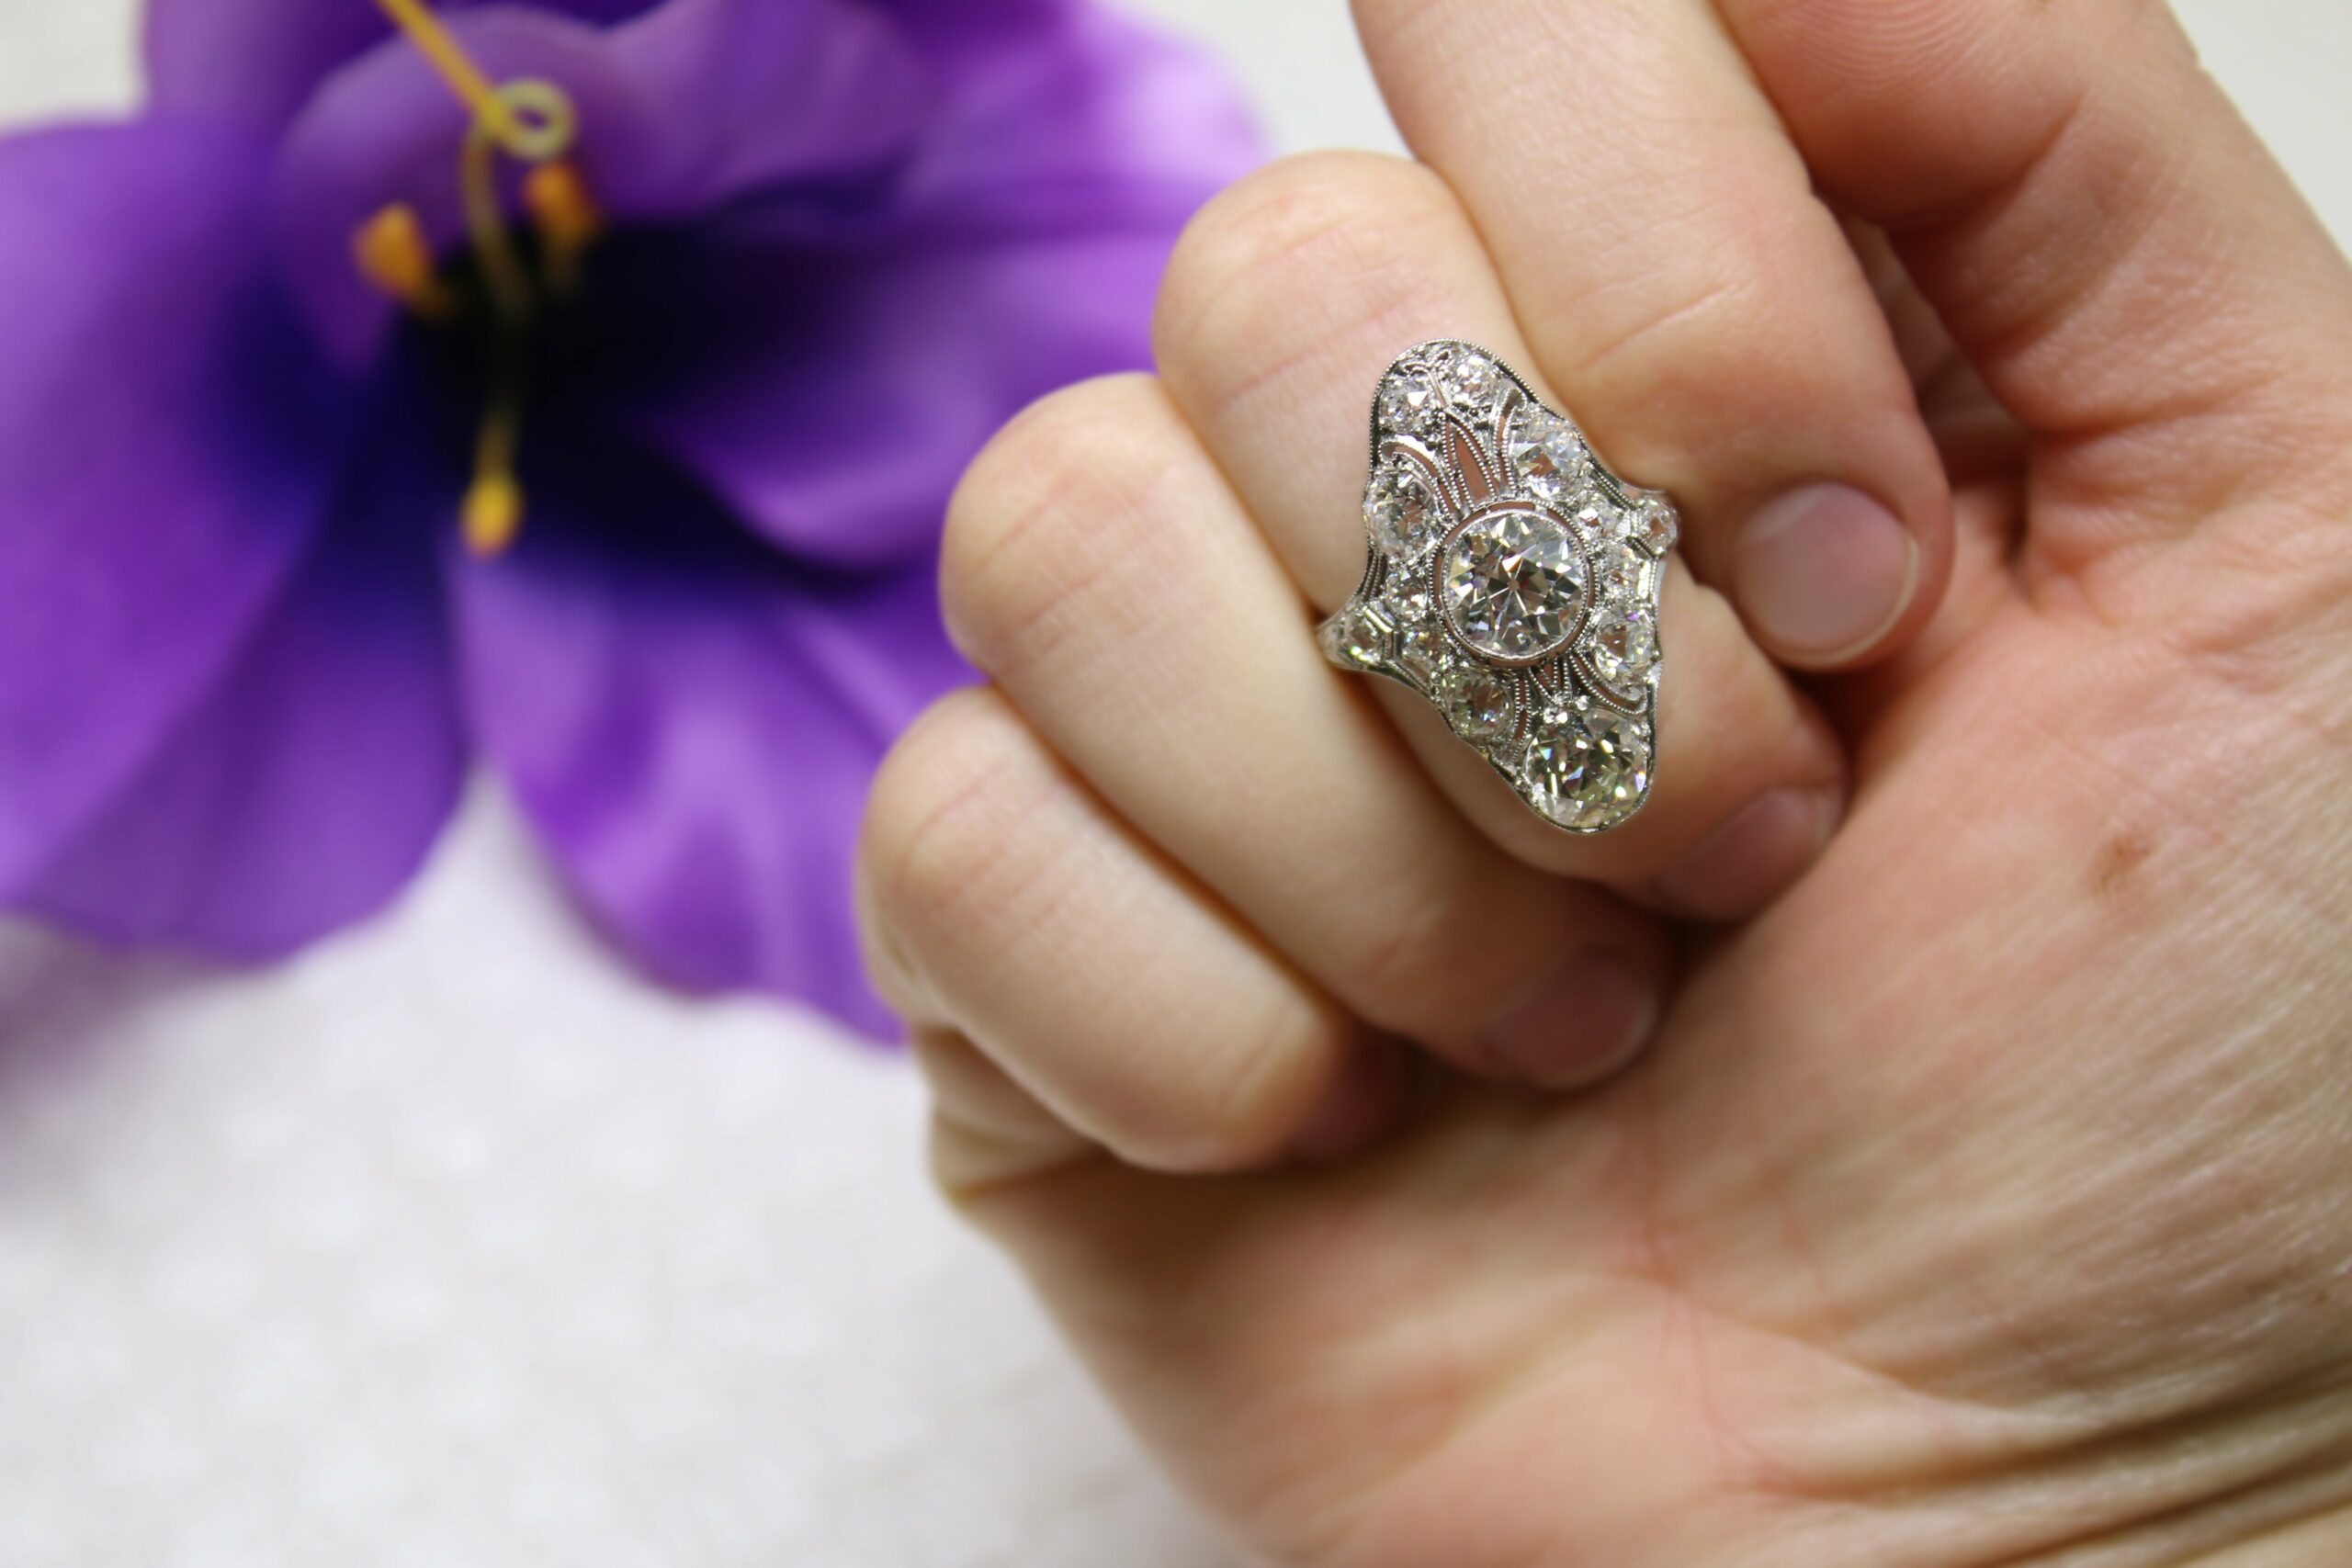 A huge Edwardian style diamond ring on a hand.